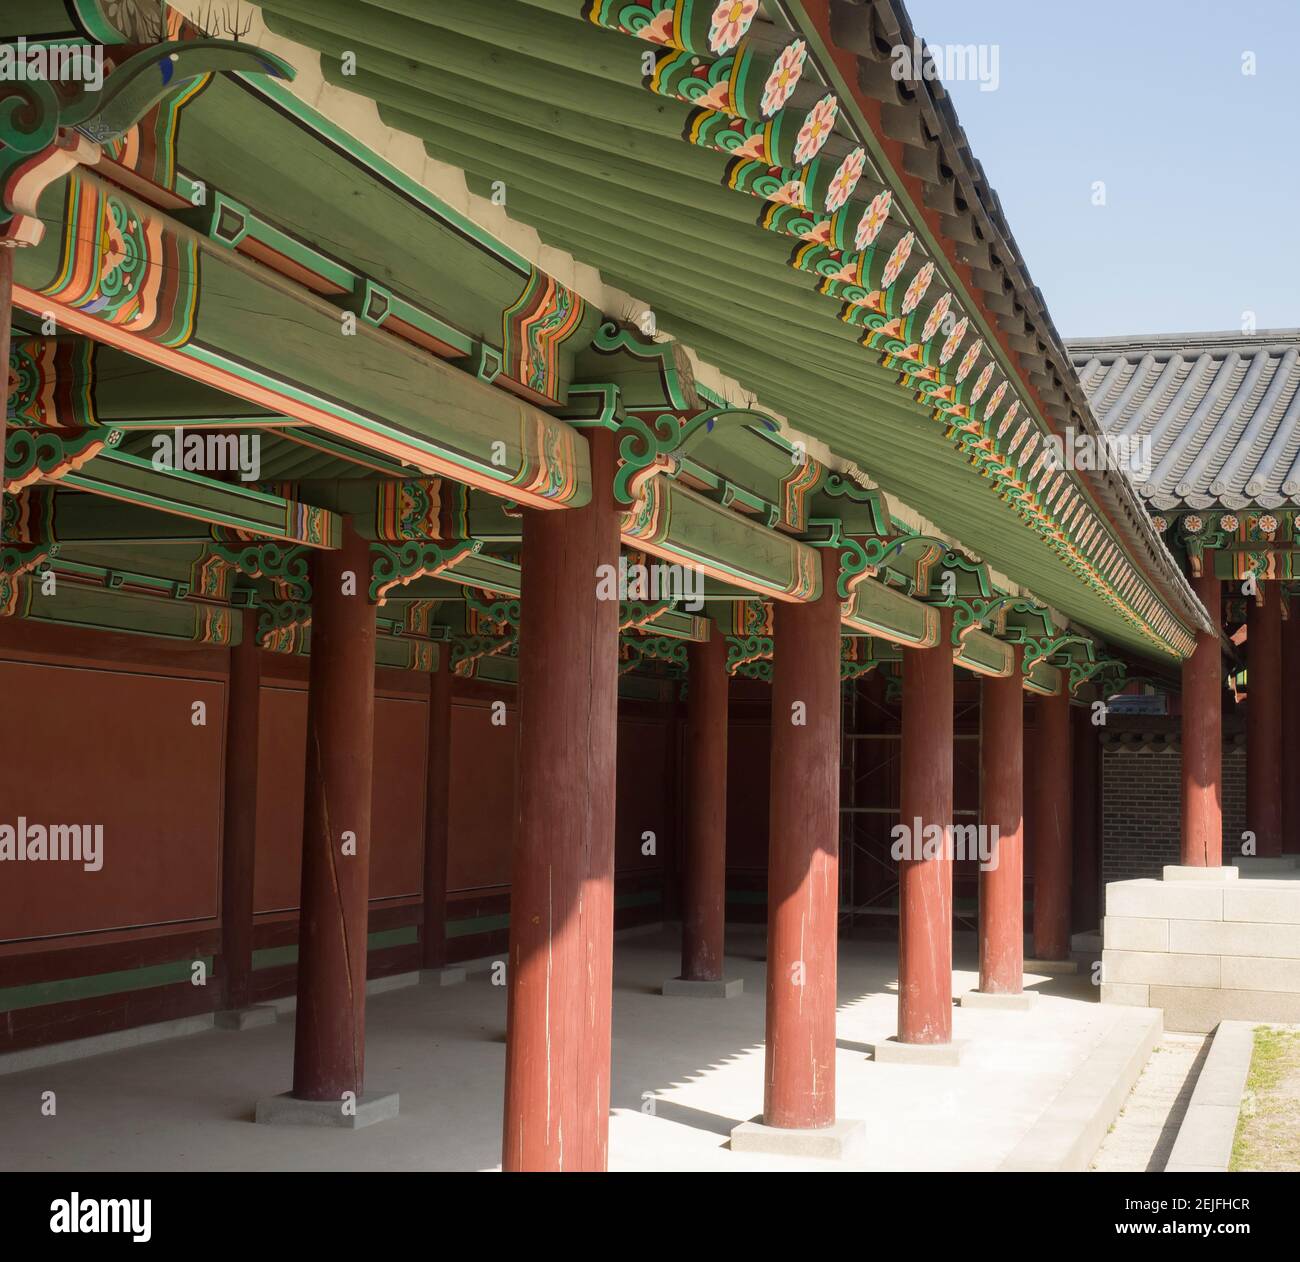 Architectural details of Changdeokgung Palace, Seoul, South Korea Stock Photo